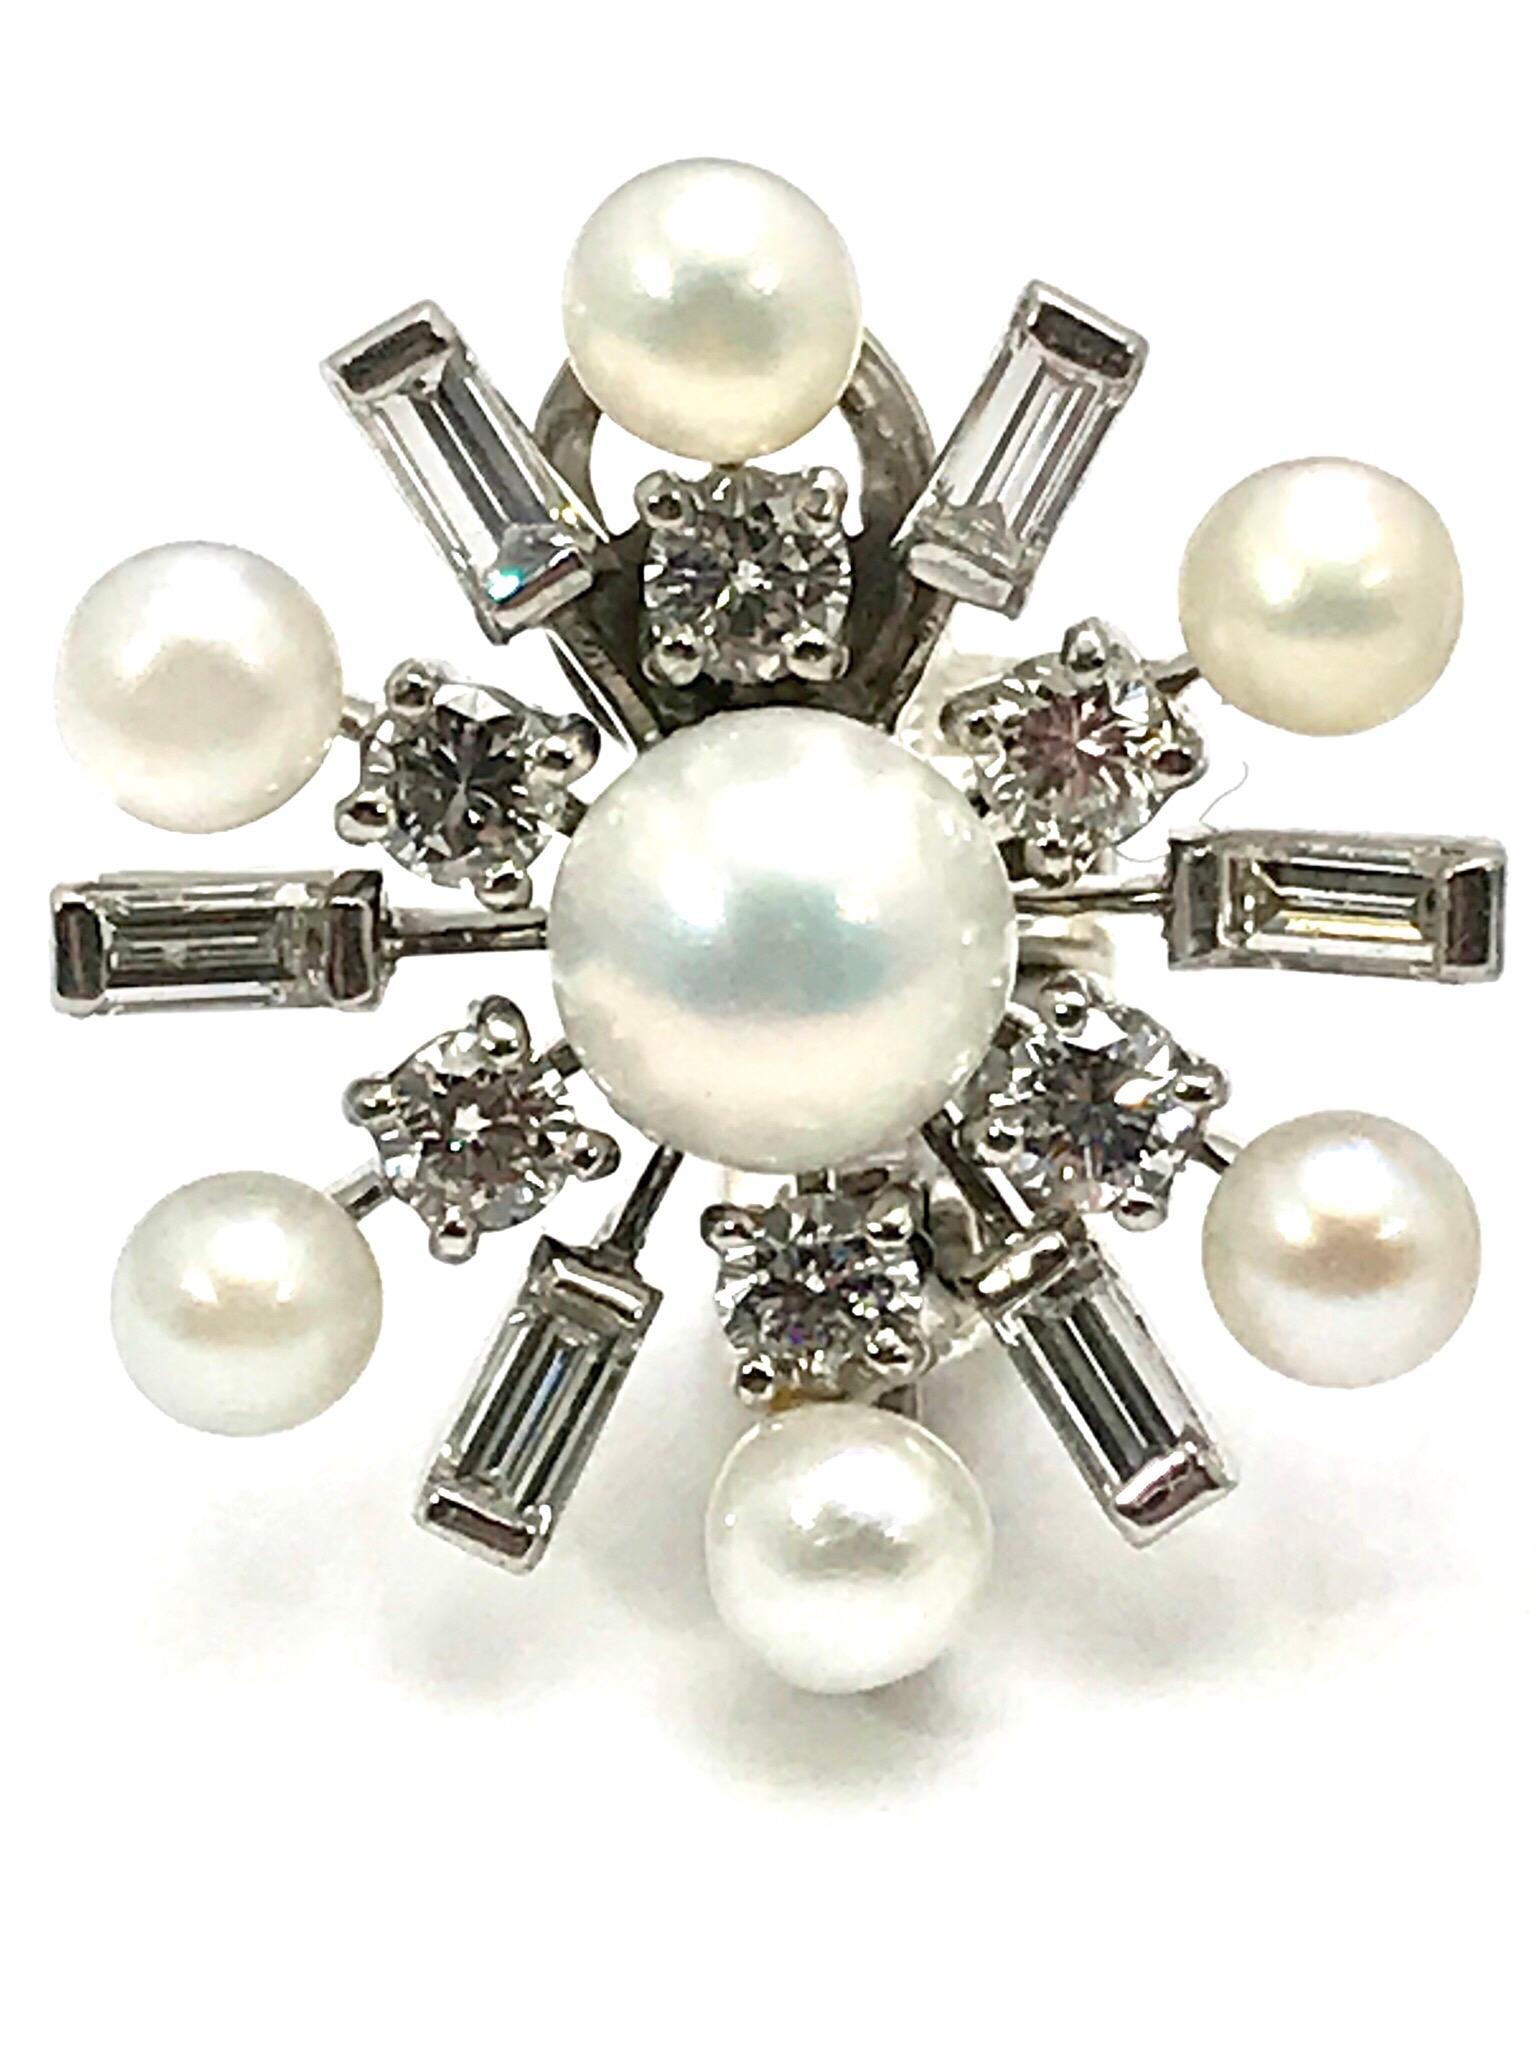 Retro 1950s Tiffany & Co. Diamond and Cultured Pearl White Gold Clip Back Earrings